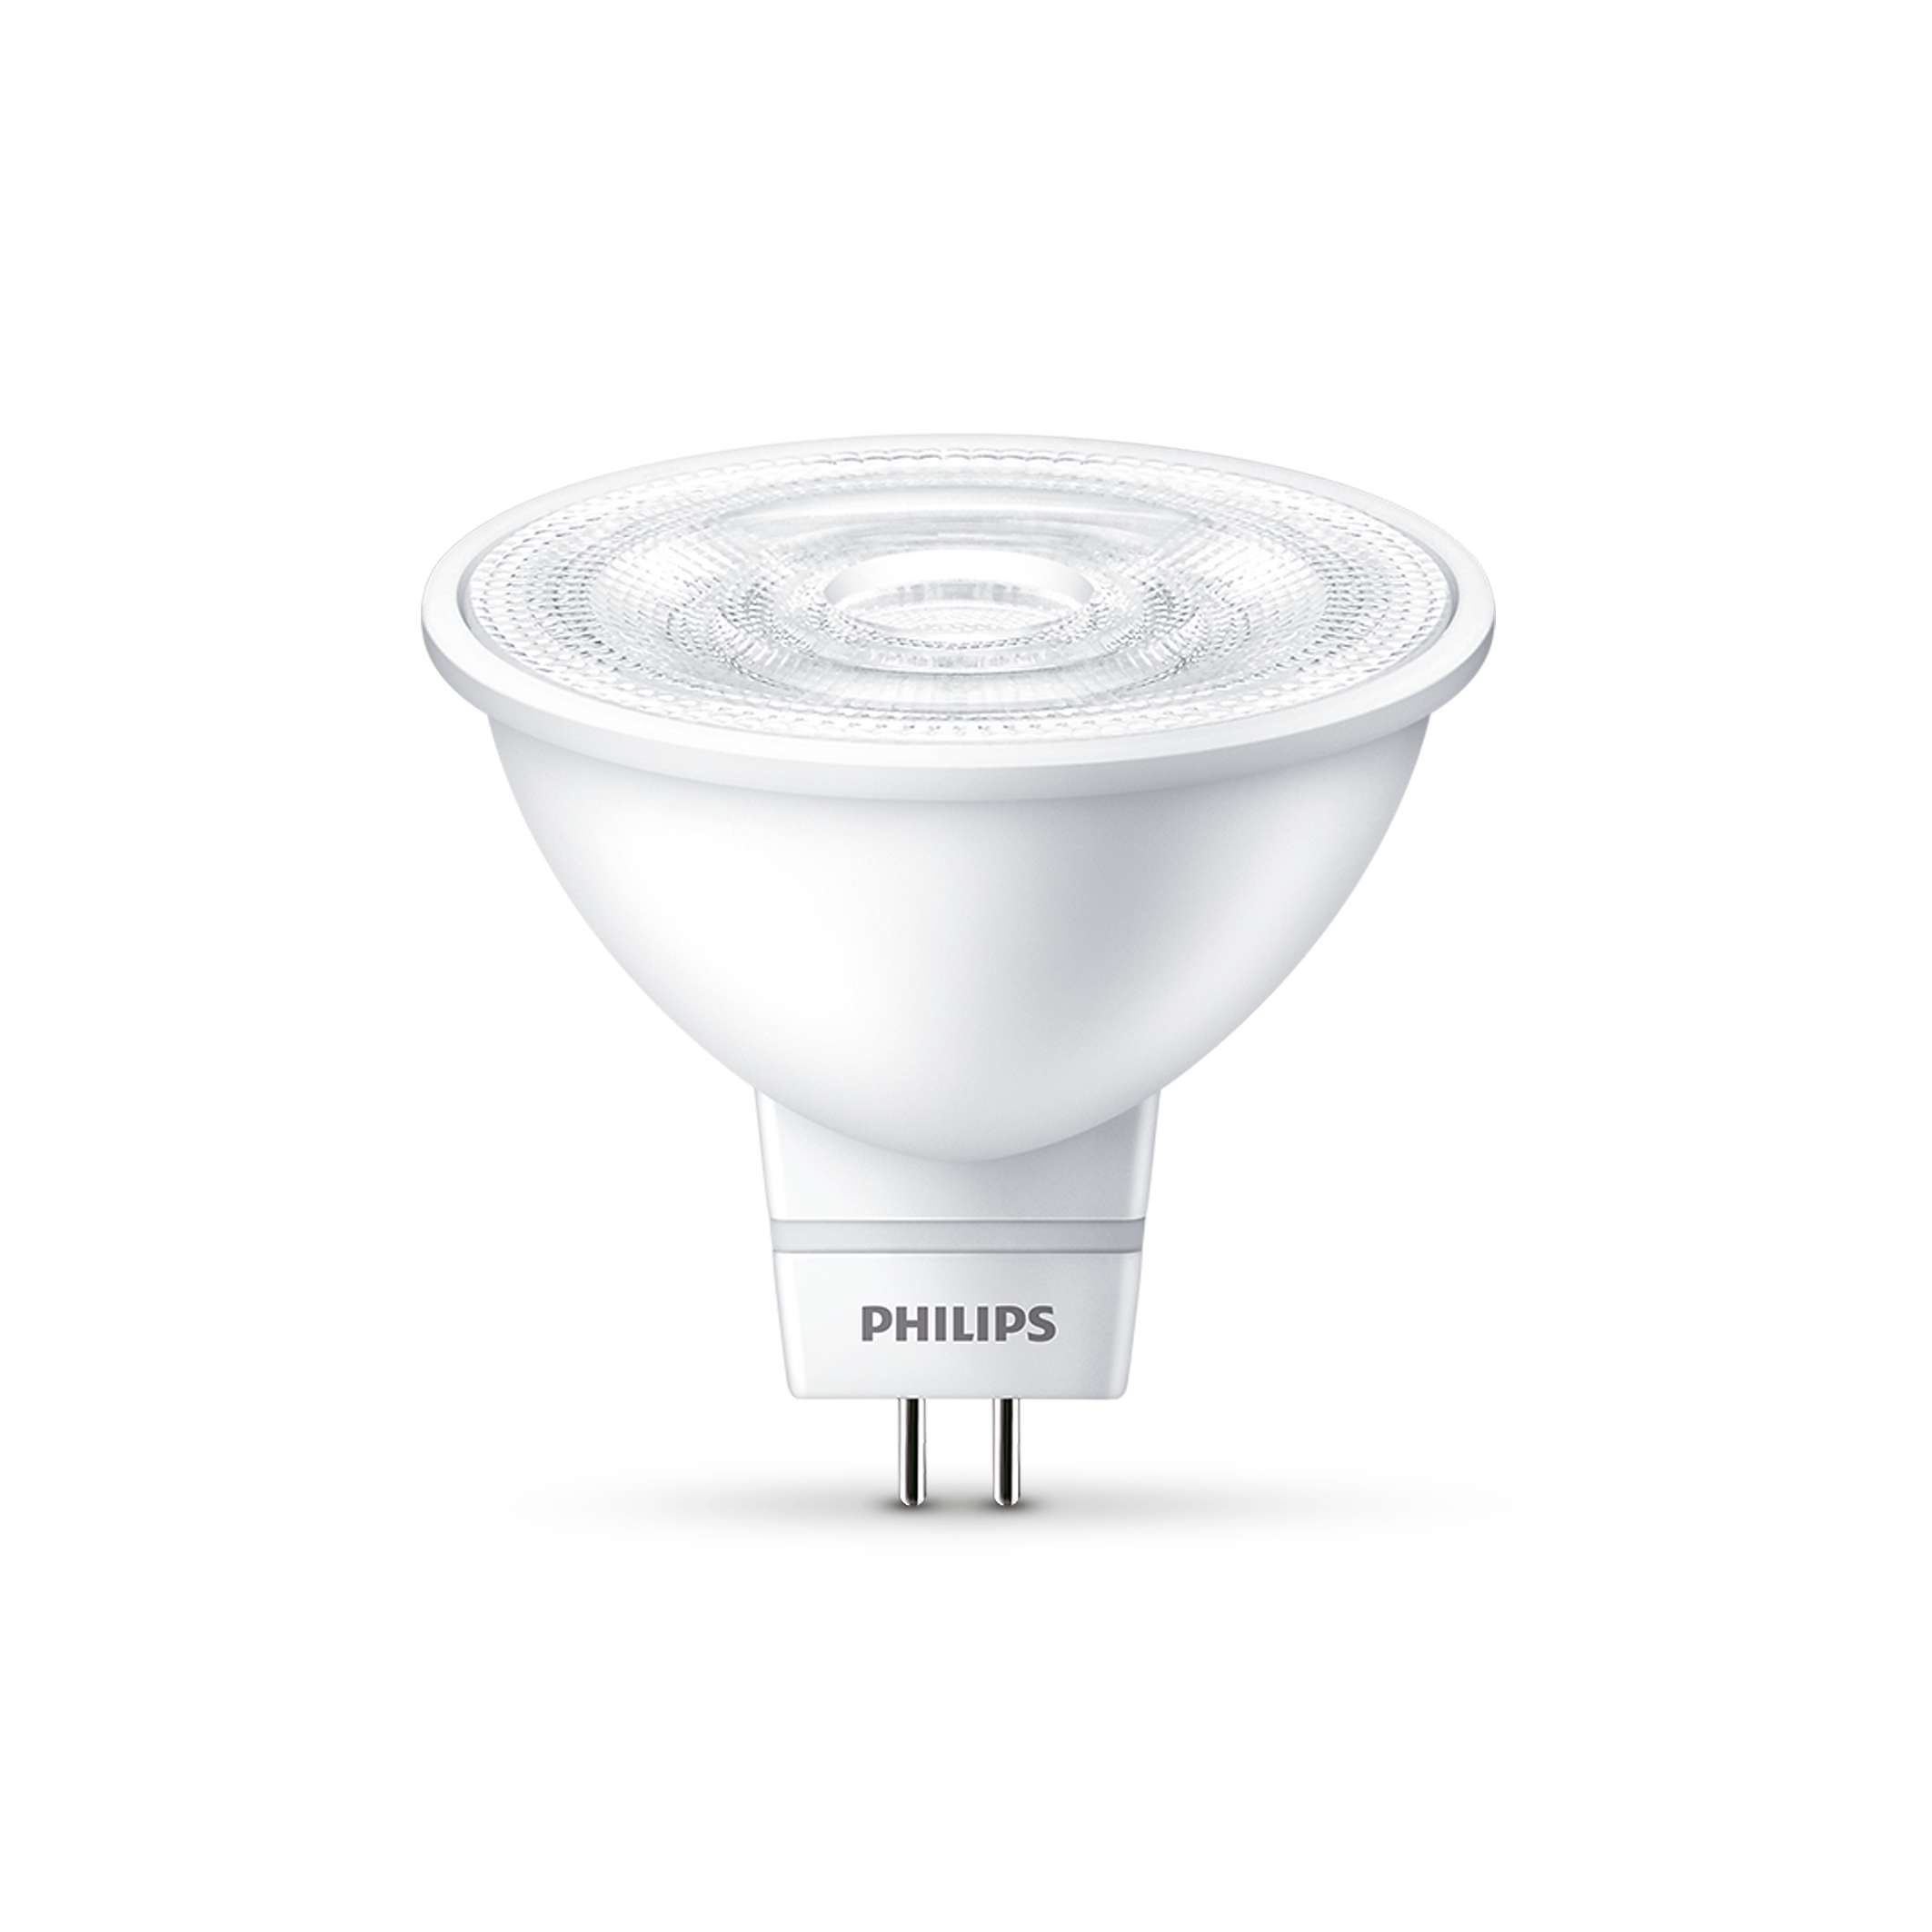 Philips 3" 5W 300lm Essential LED Spot Light Lighting Fixtures Downlight Lamp 